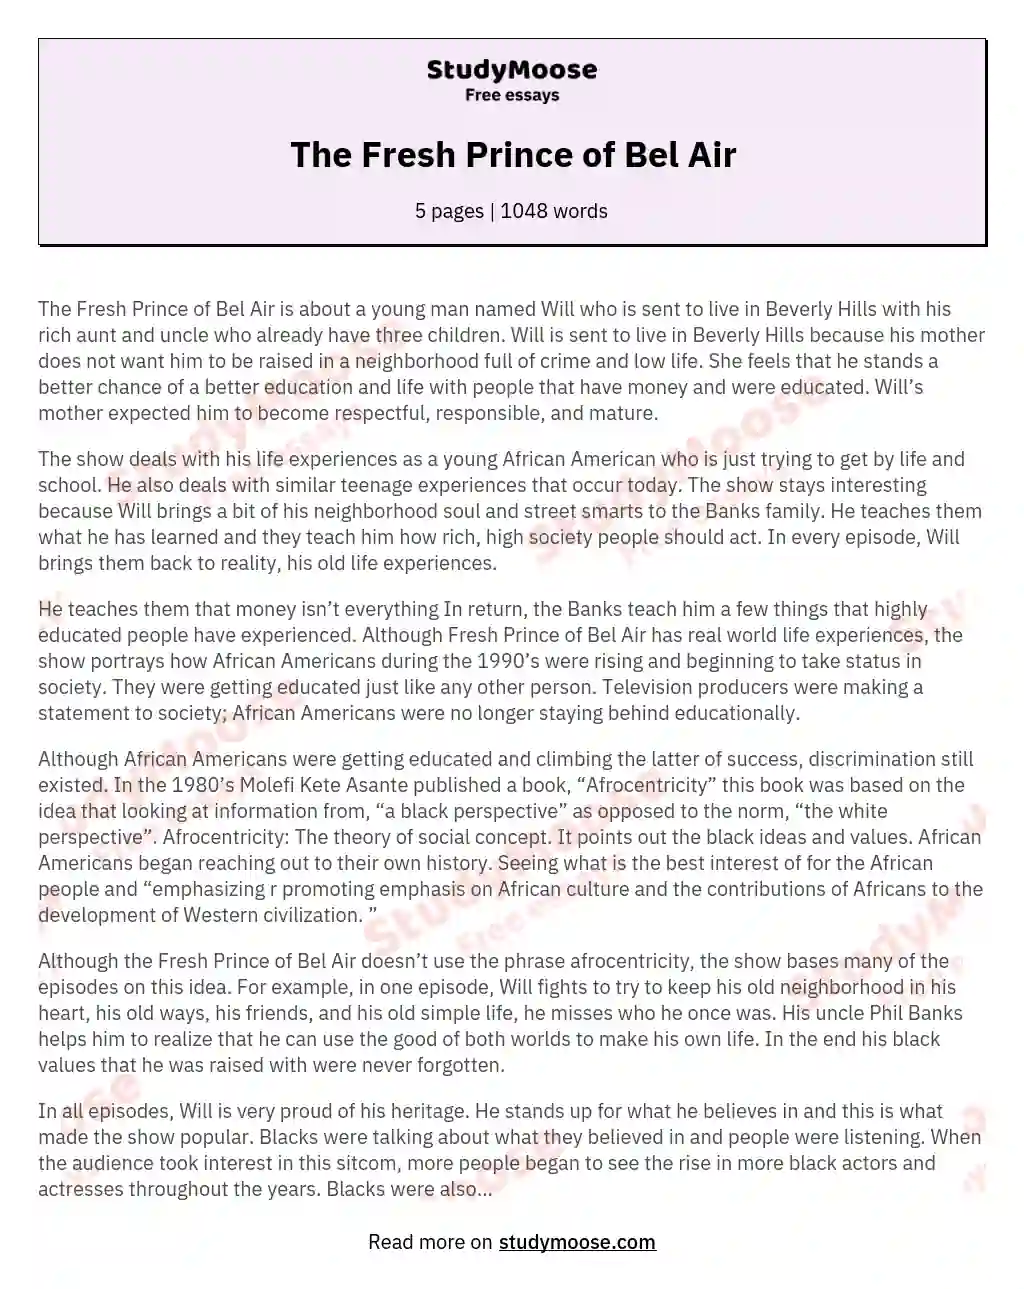 The Fresh Prince of Bel Air essay